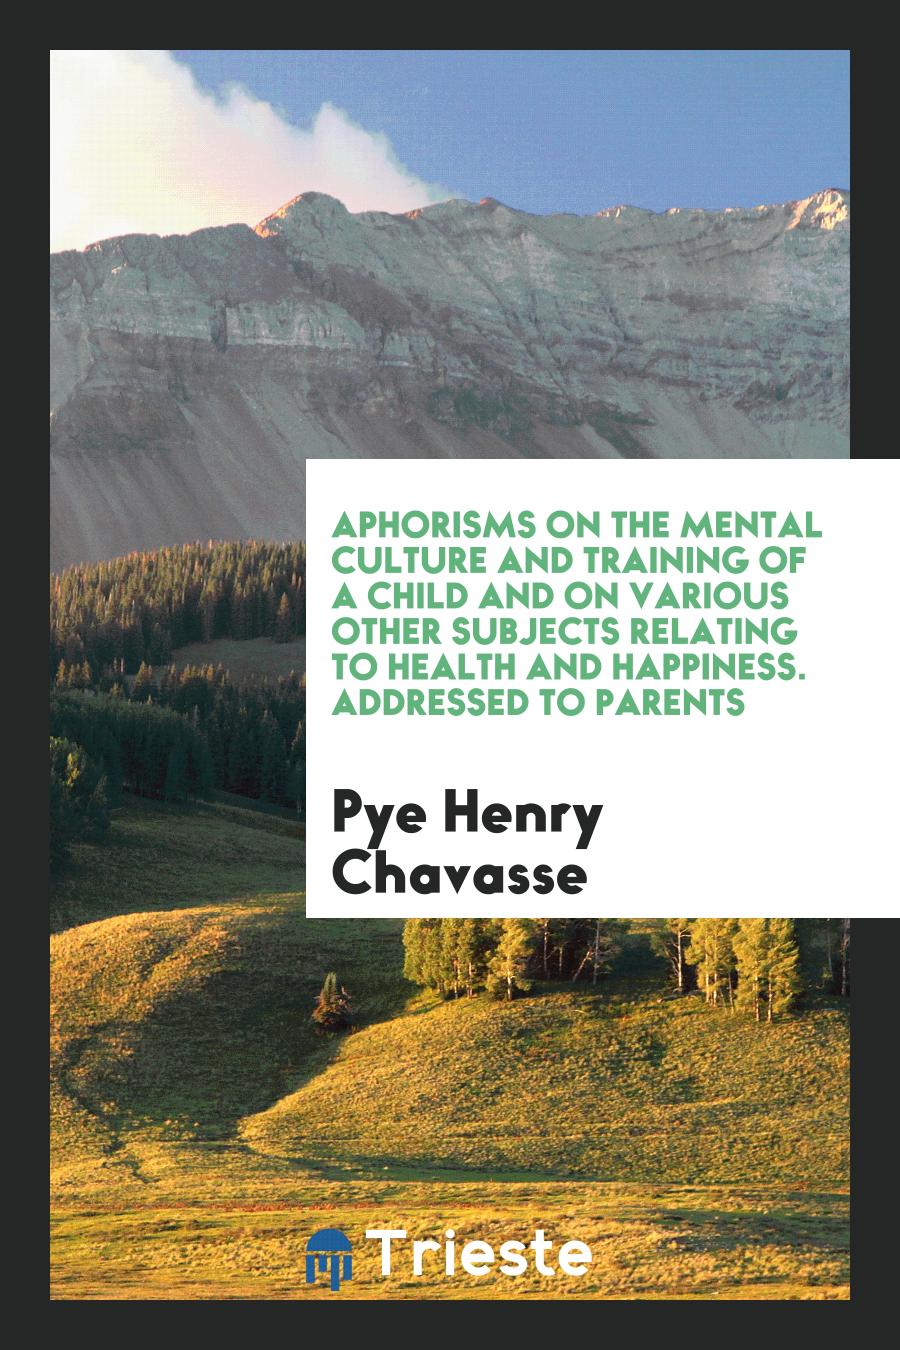 Aphorisms on the Mental Culture and Training of a Child and on Various Other Subjects Relating to Health and Happiness. Addressed to Parents